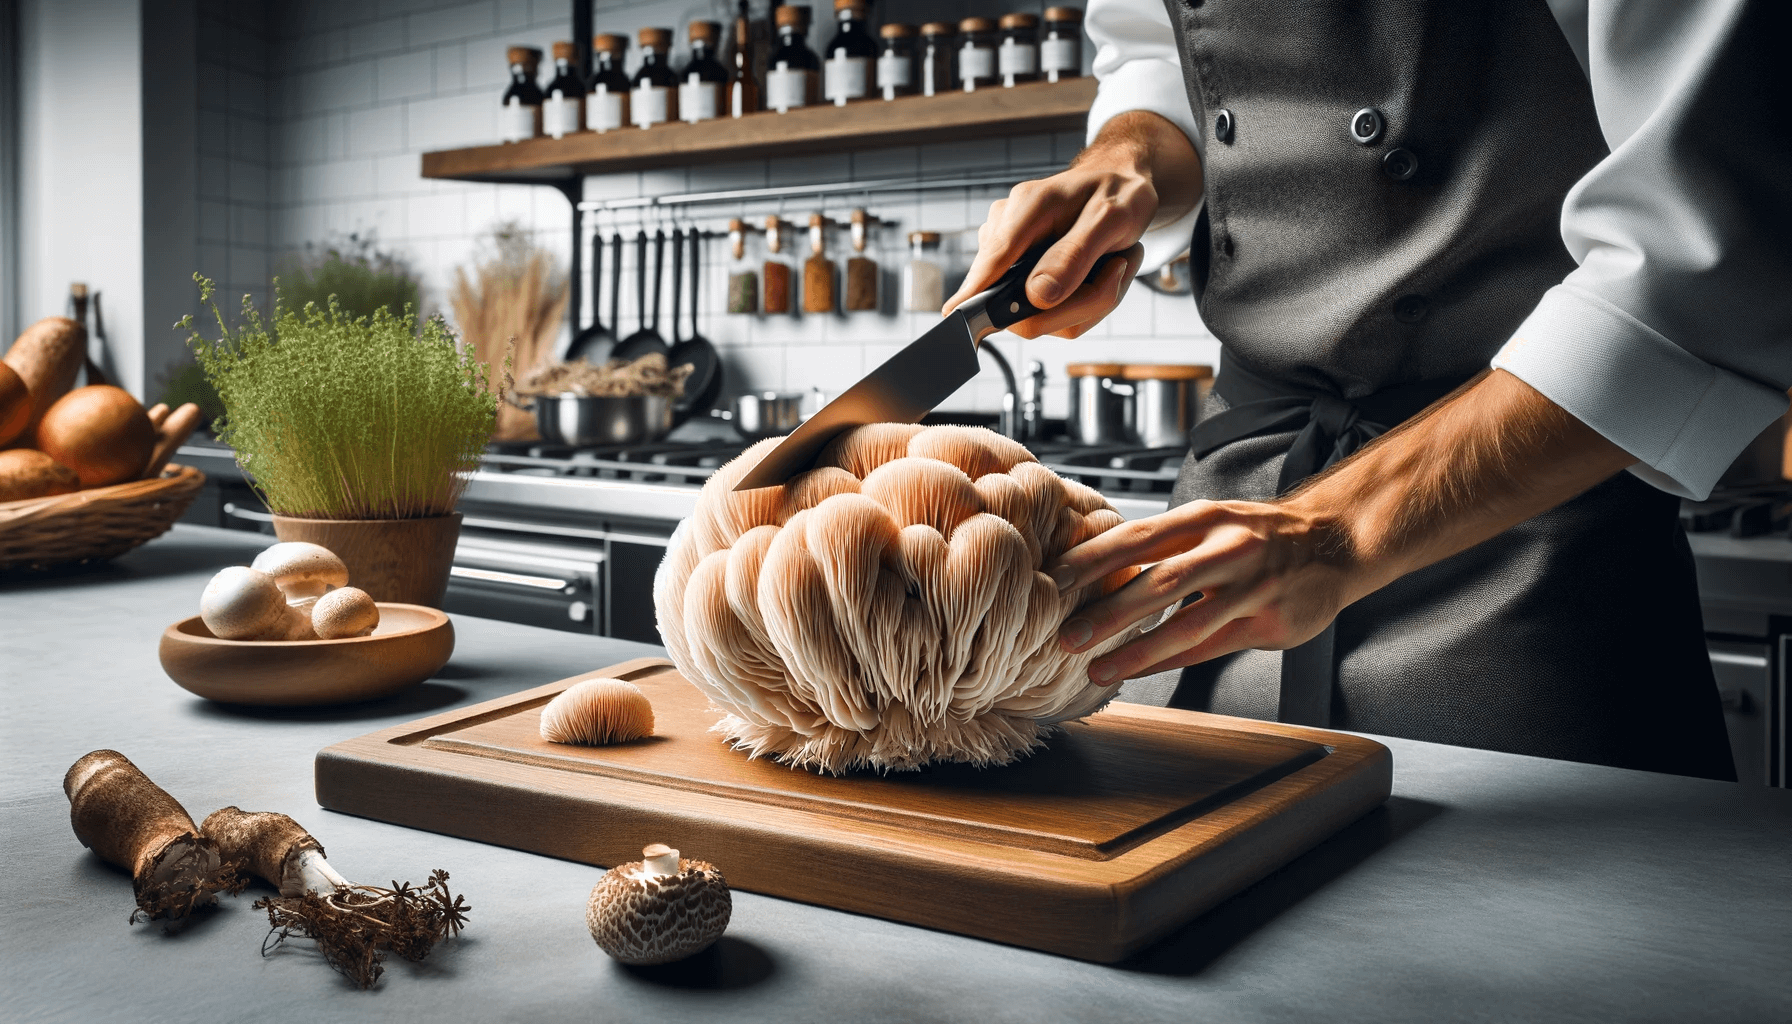 Large Lion's Mane mushroom on a cutting board in a professional kitchen with a chef holding a knife ready to slice it. The kitchen is modern and well-lit.